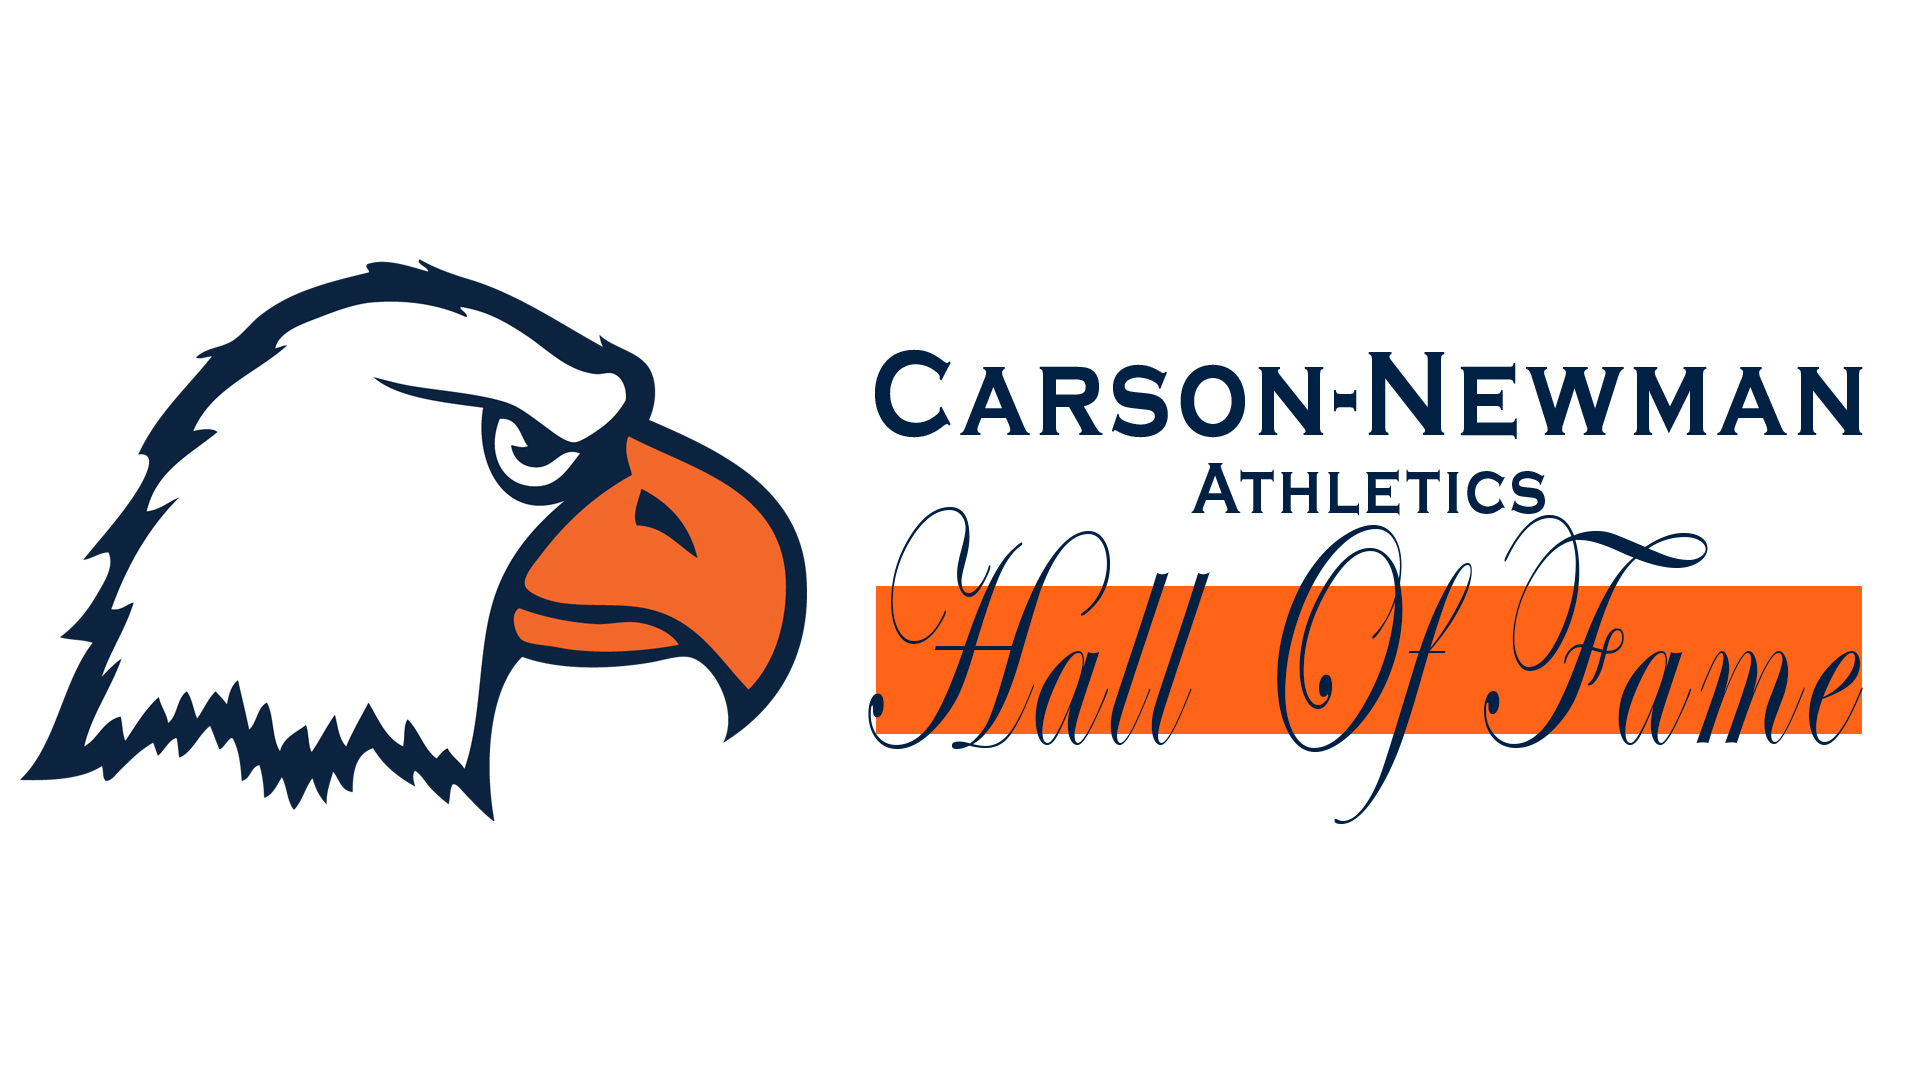 Six set for induction Friday during 2021 Carson-Newman Hall of Fame Banquet